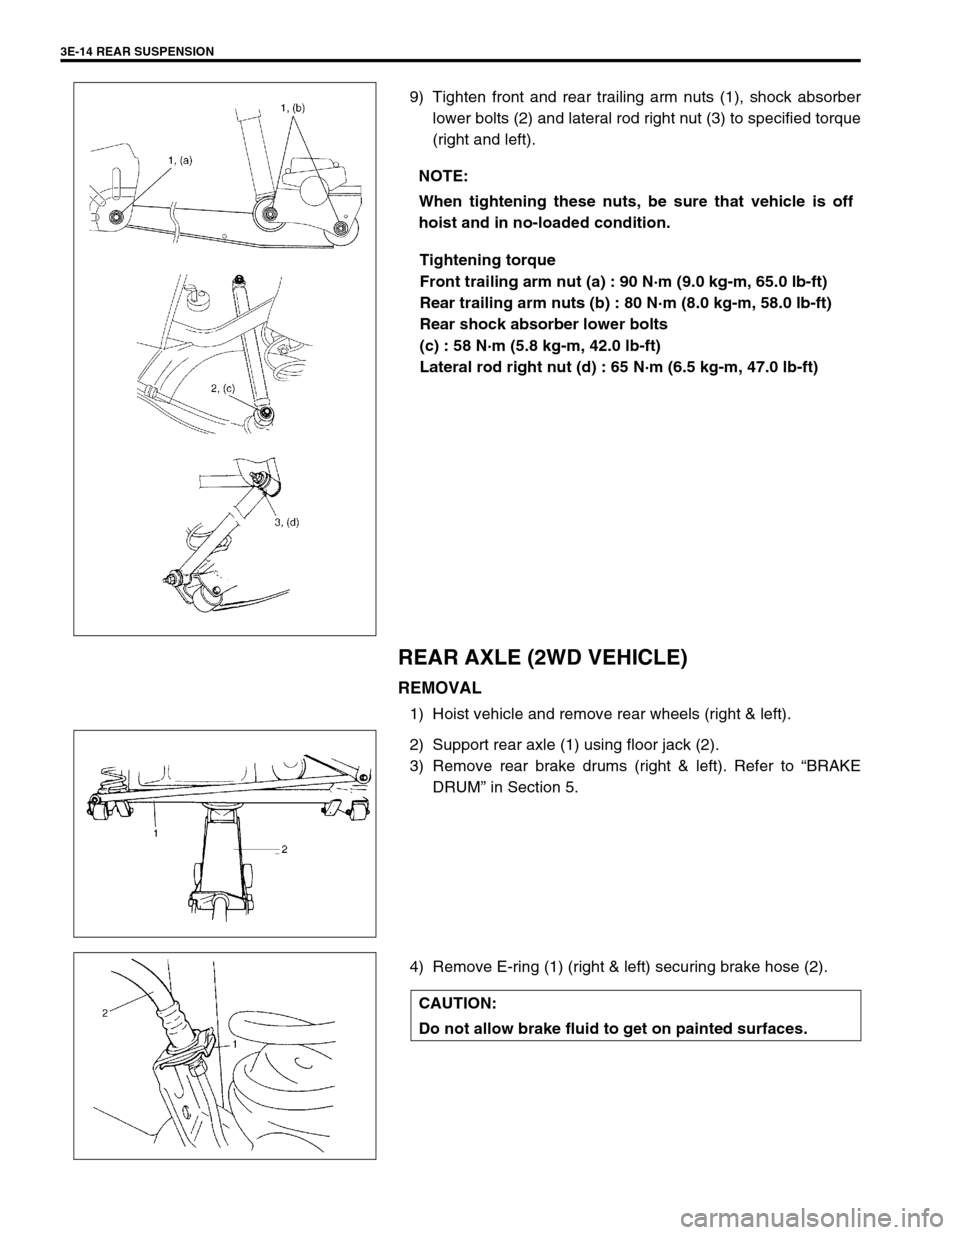 SUZUKI SWIFT 2000 1.G RG413 Service User Guide 3E-14 REAR SUSPENSION
9) Tighten front and rear trailing arm nuts (1), shock absorber
lower bolts (2) and lateral rod right nut (3) to specified torque
(right and left).
Tightening torque
Front traili